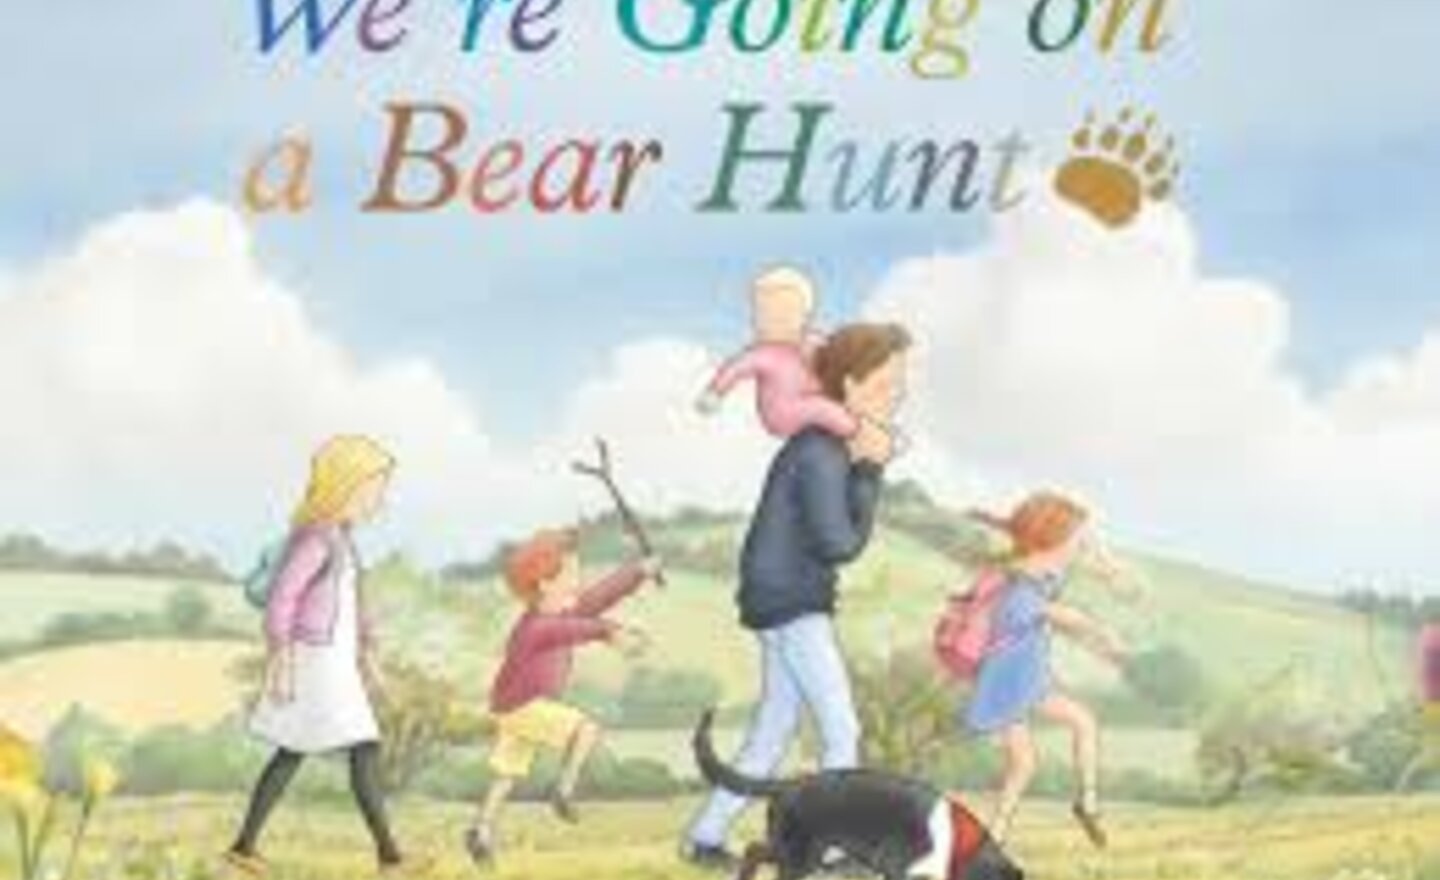 Image of We’re Going on a Bear Hunt